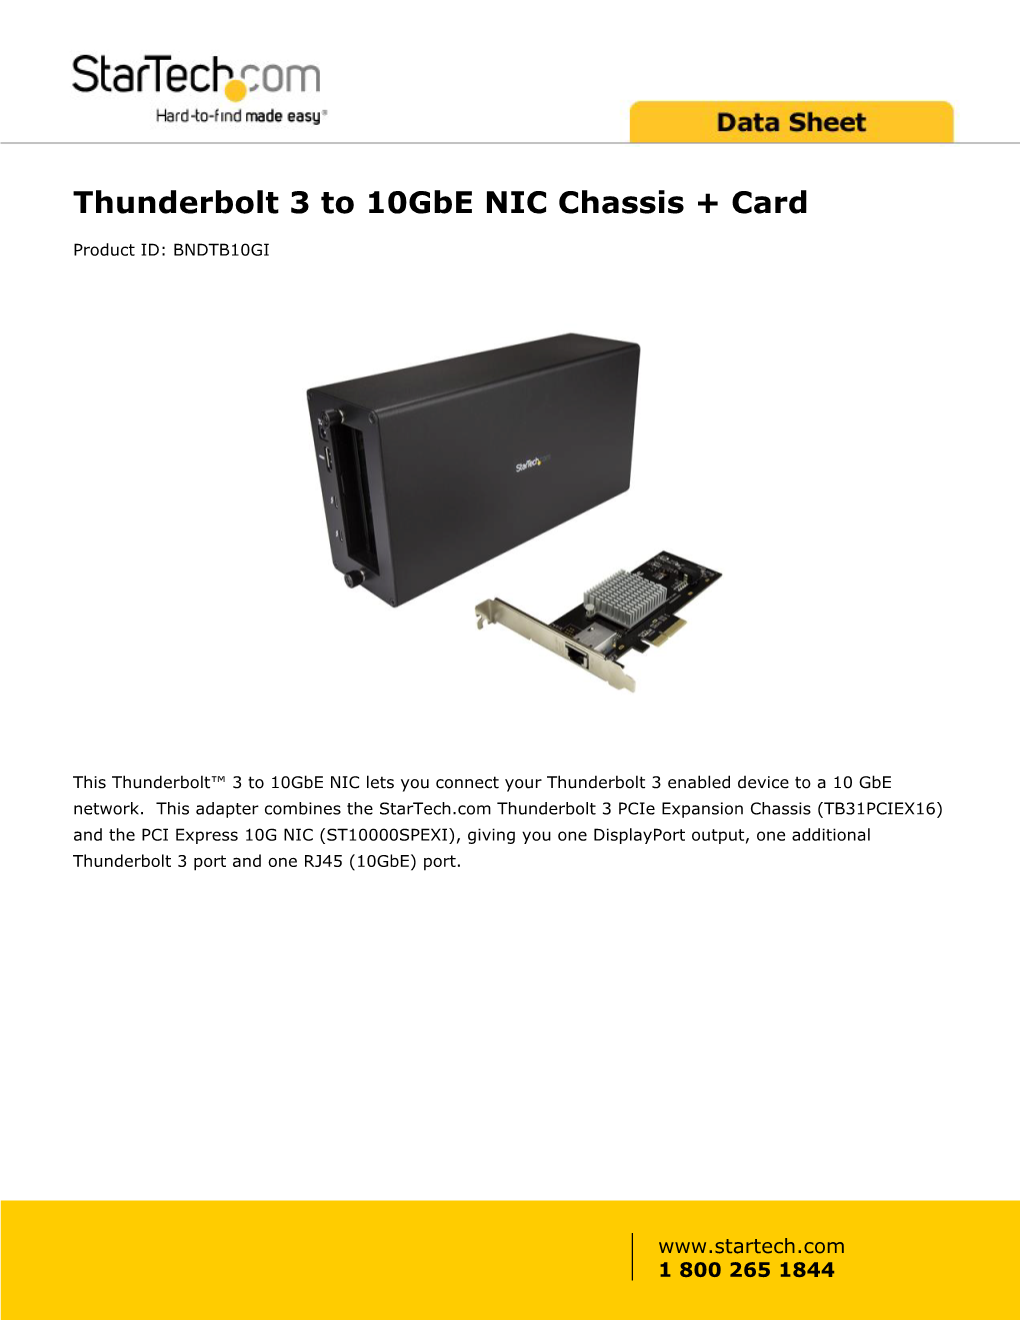 Thunderbolt 3 to 10Gbe NIC Chassis + Card